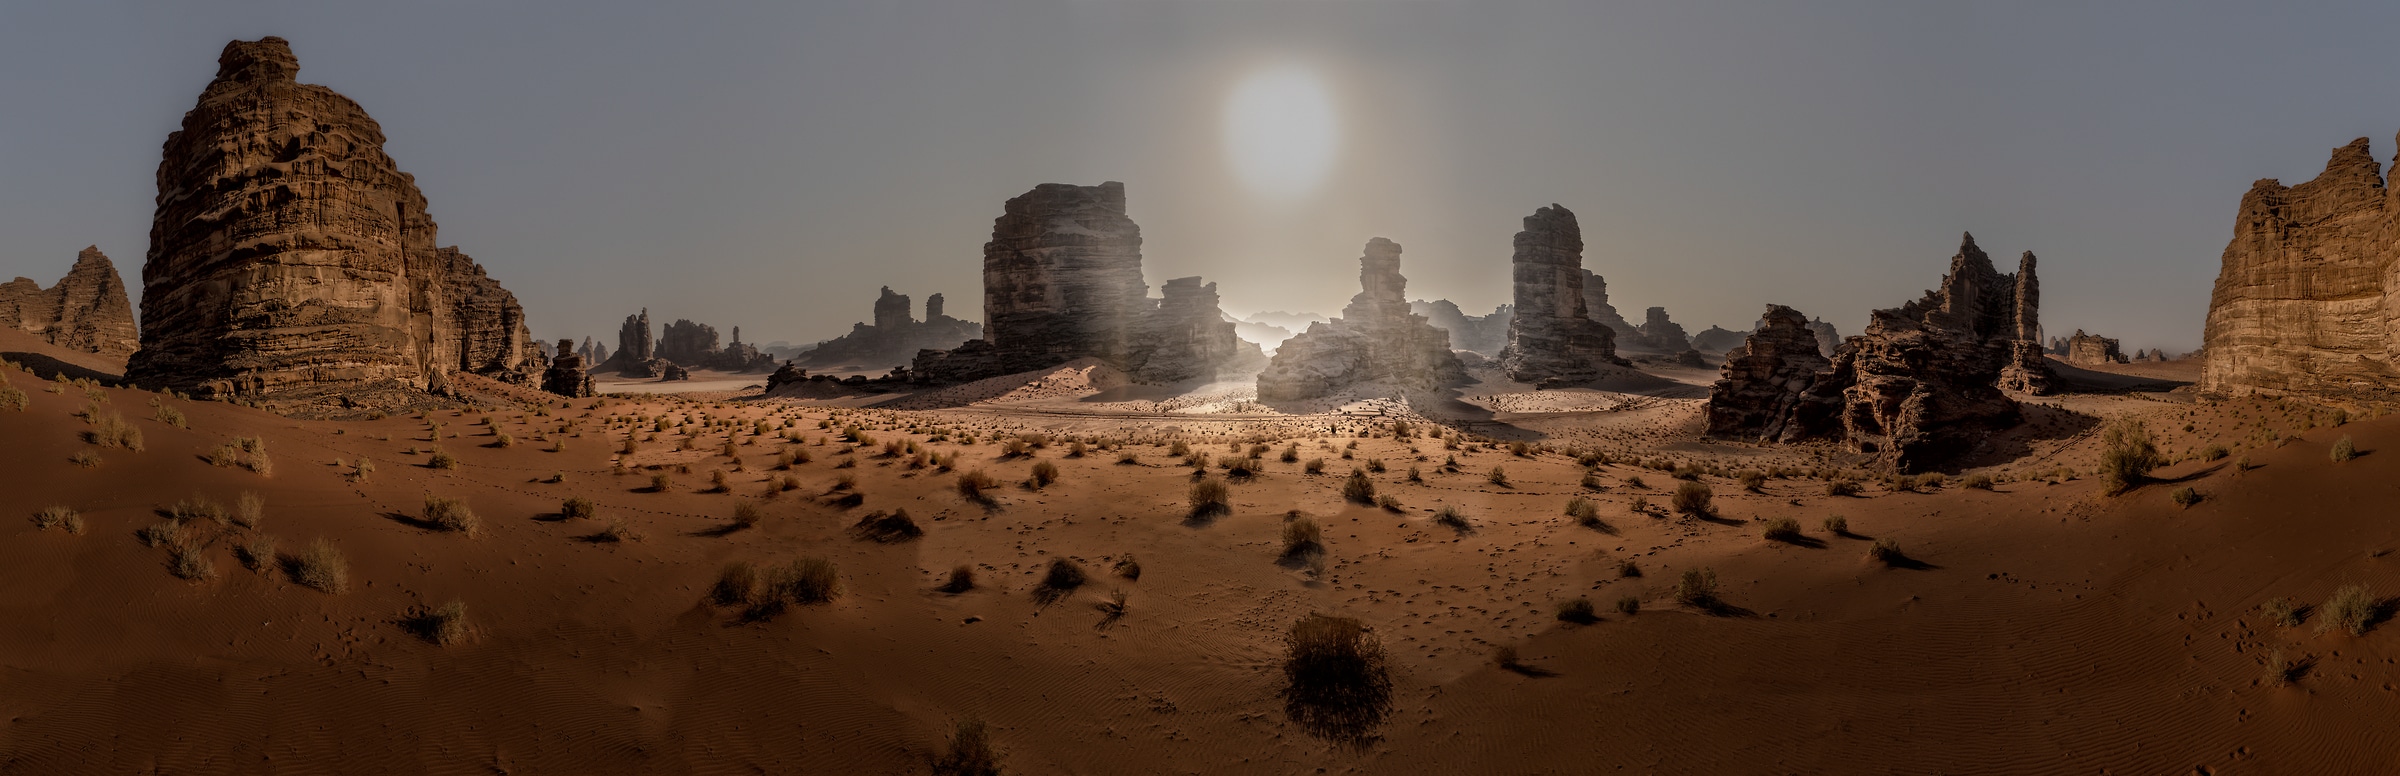 1,025 megapixels! A very high resolution, large-format VAST photo print of the sun in the desert with unique rock formations; landscape photograph created by Peter Rodger in Tabuk, Saudi Arabia.